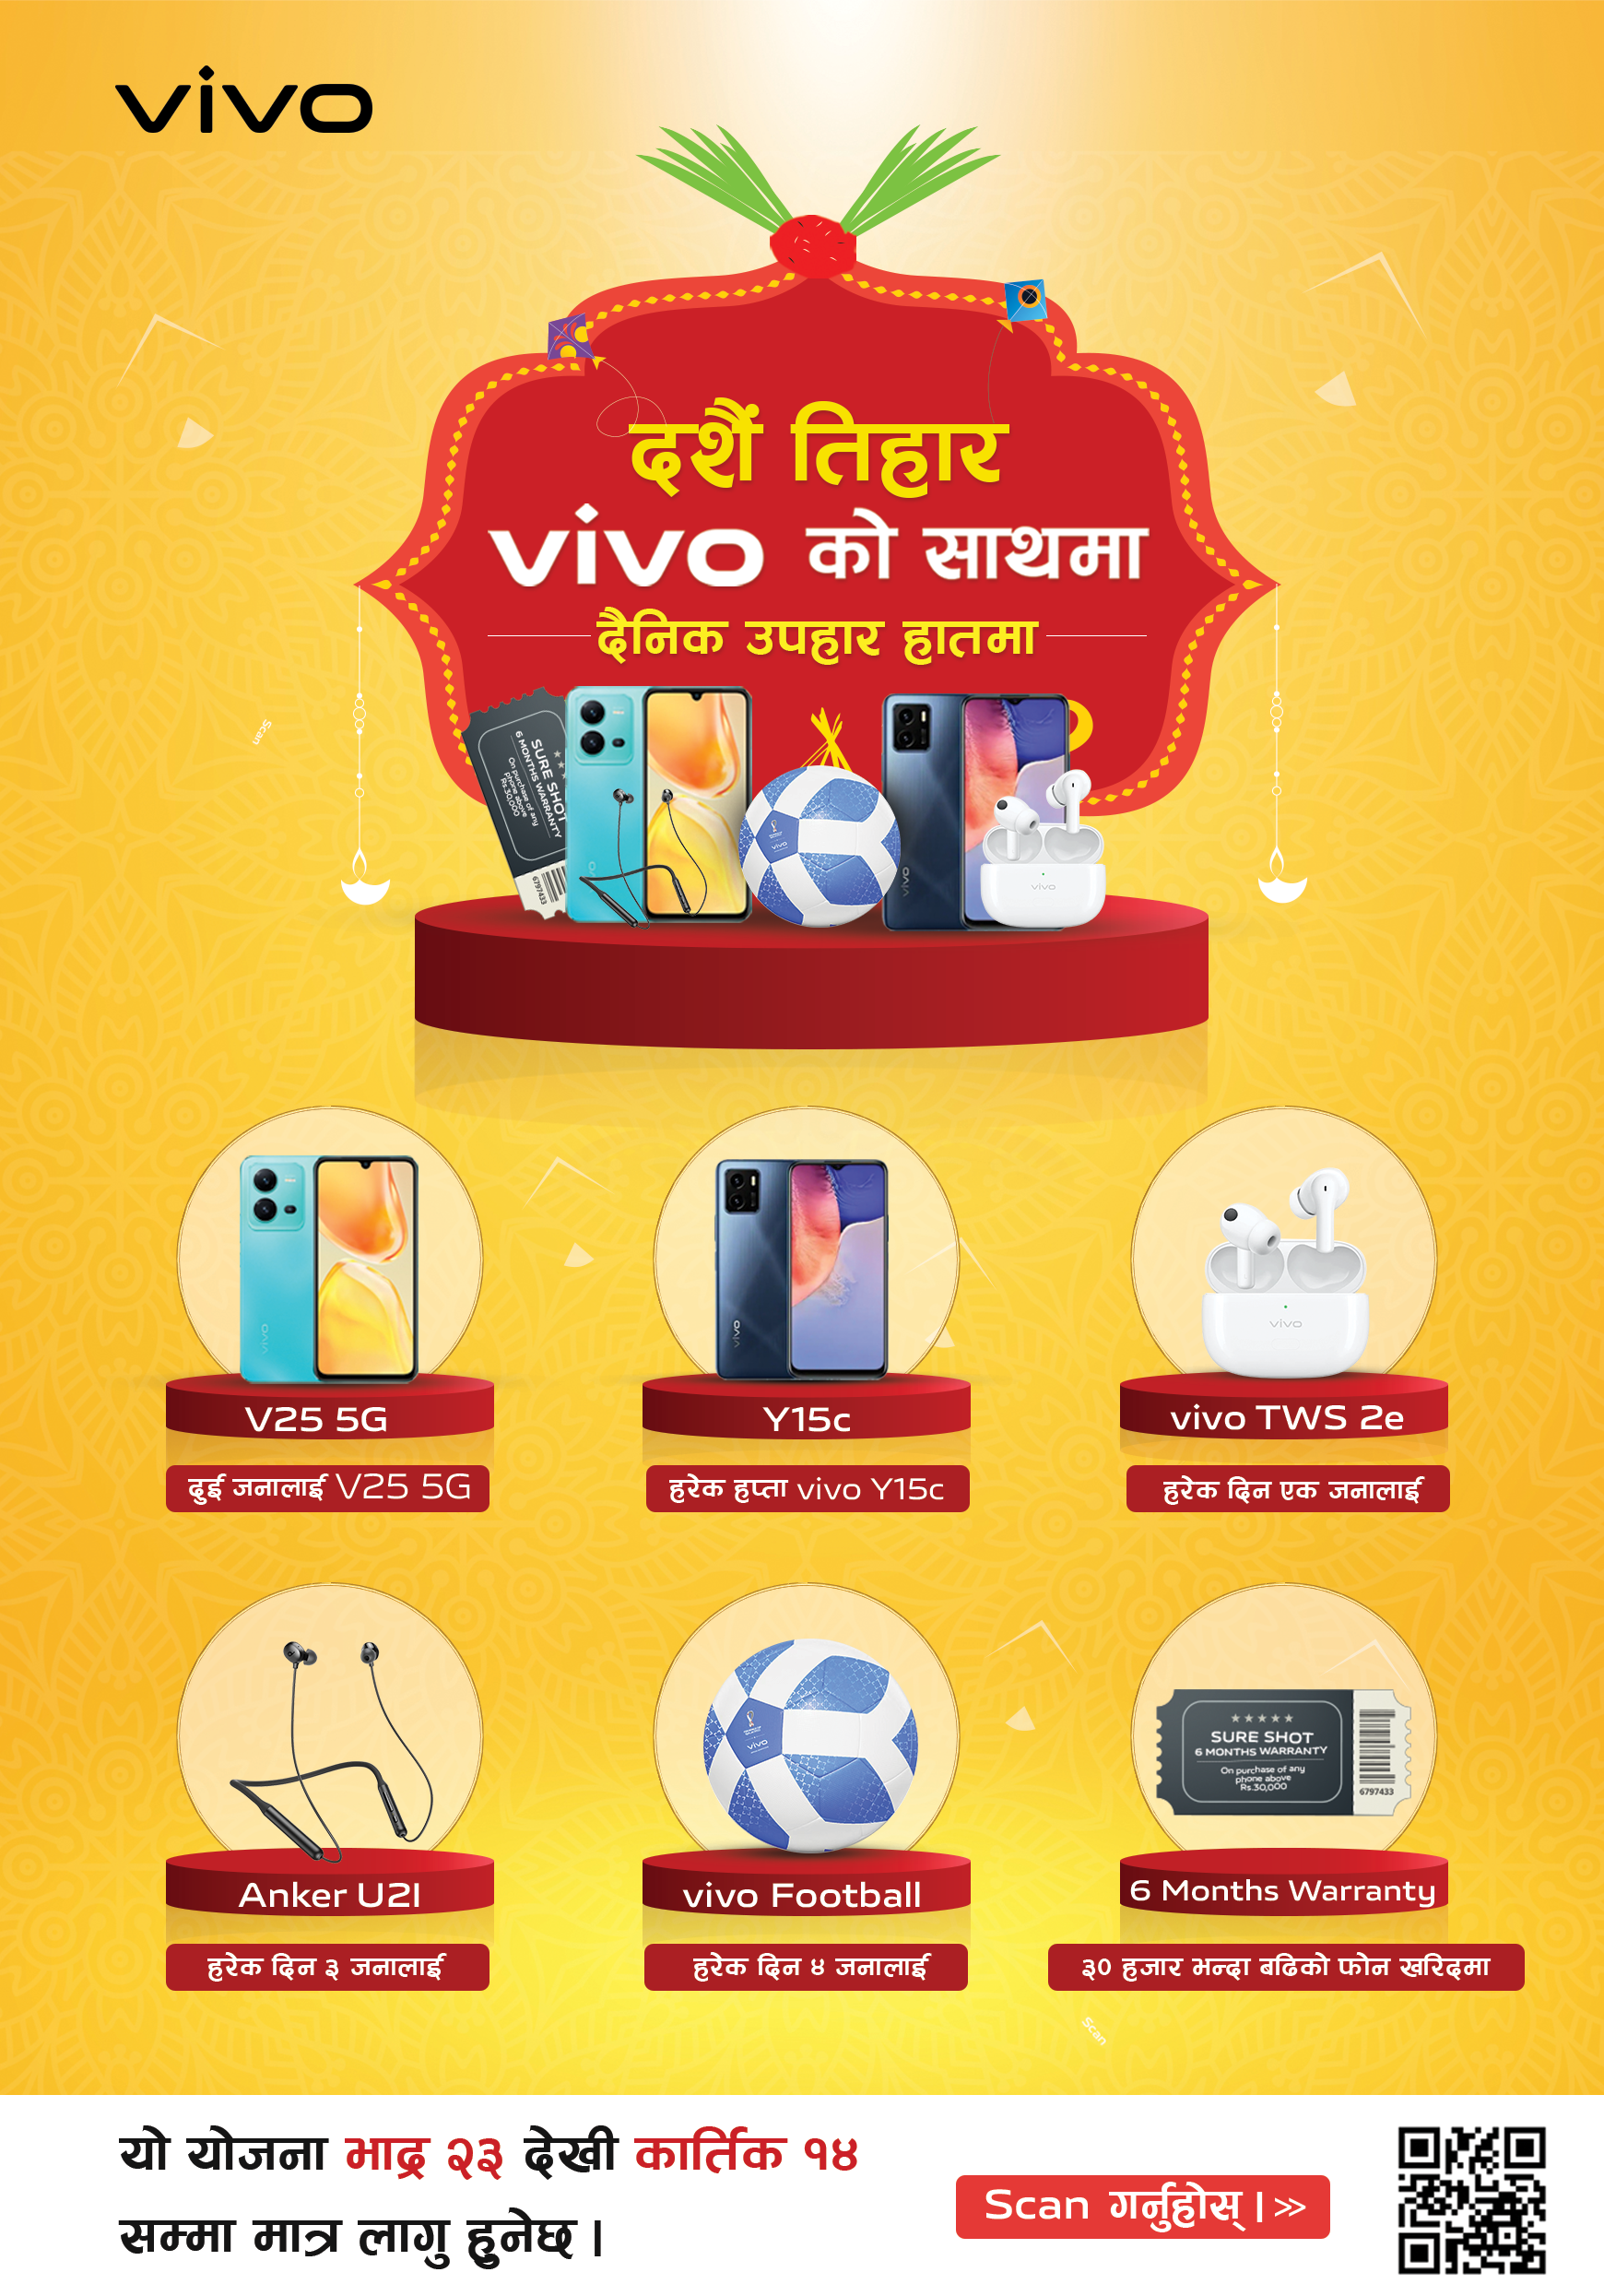 Last chances to grab the festival offers of Vivo